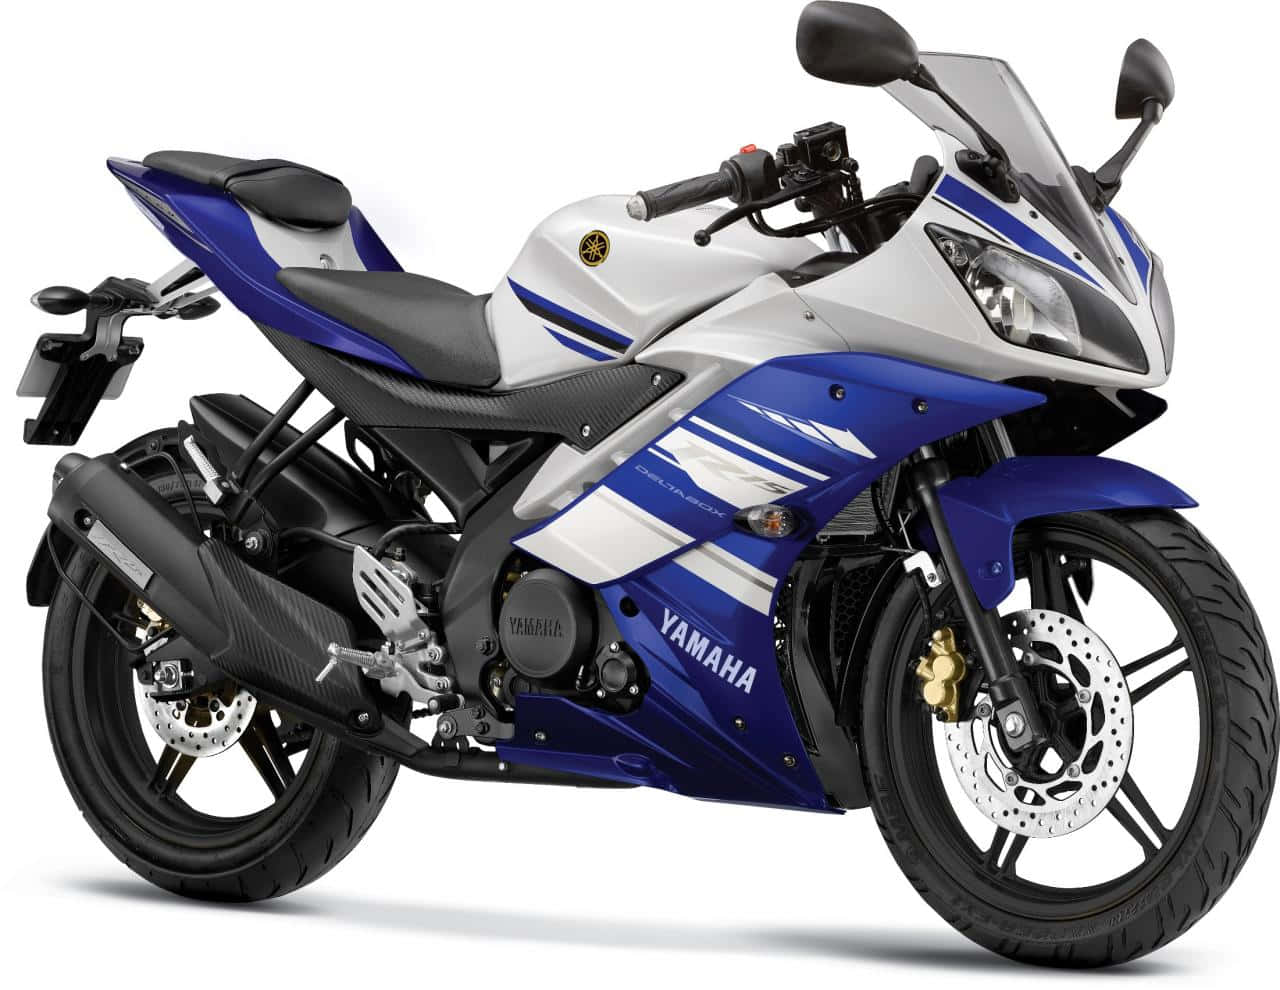 Capture the Thrill of Speed on the R15